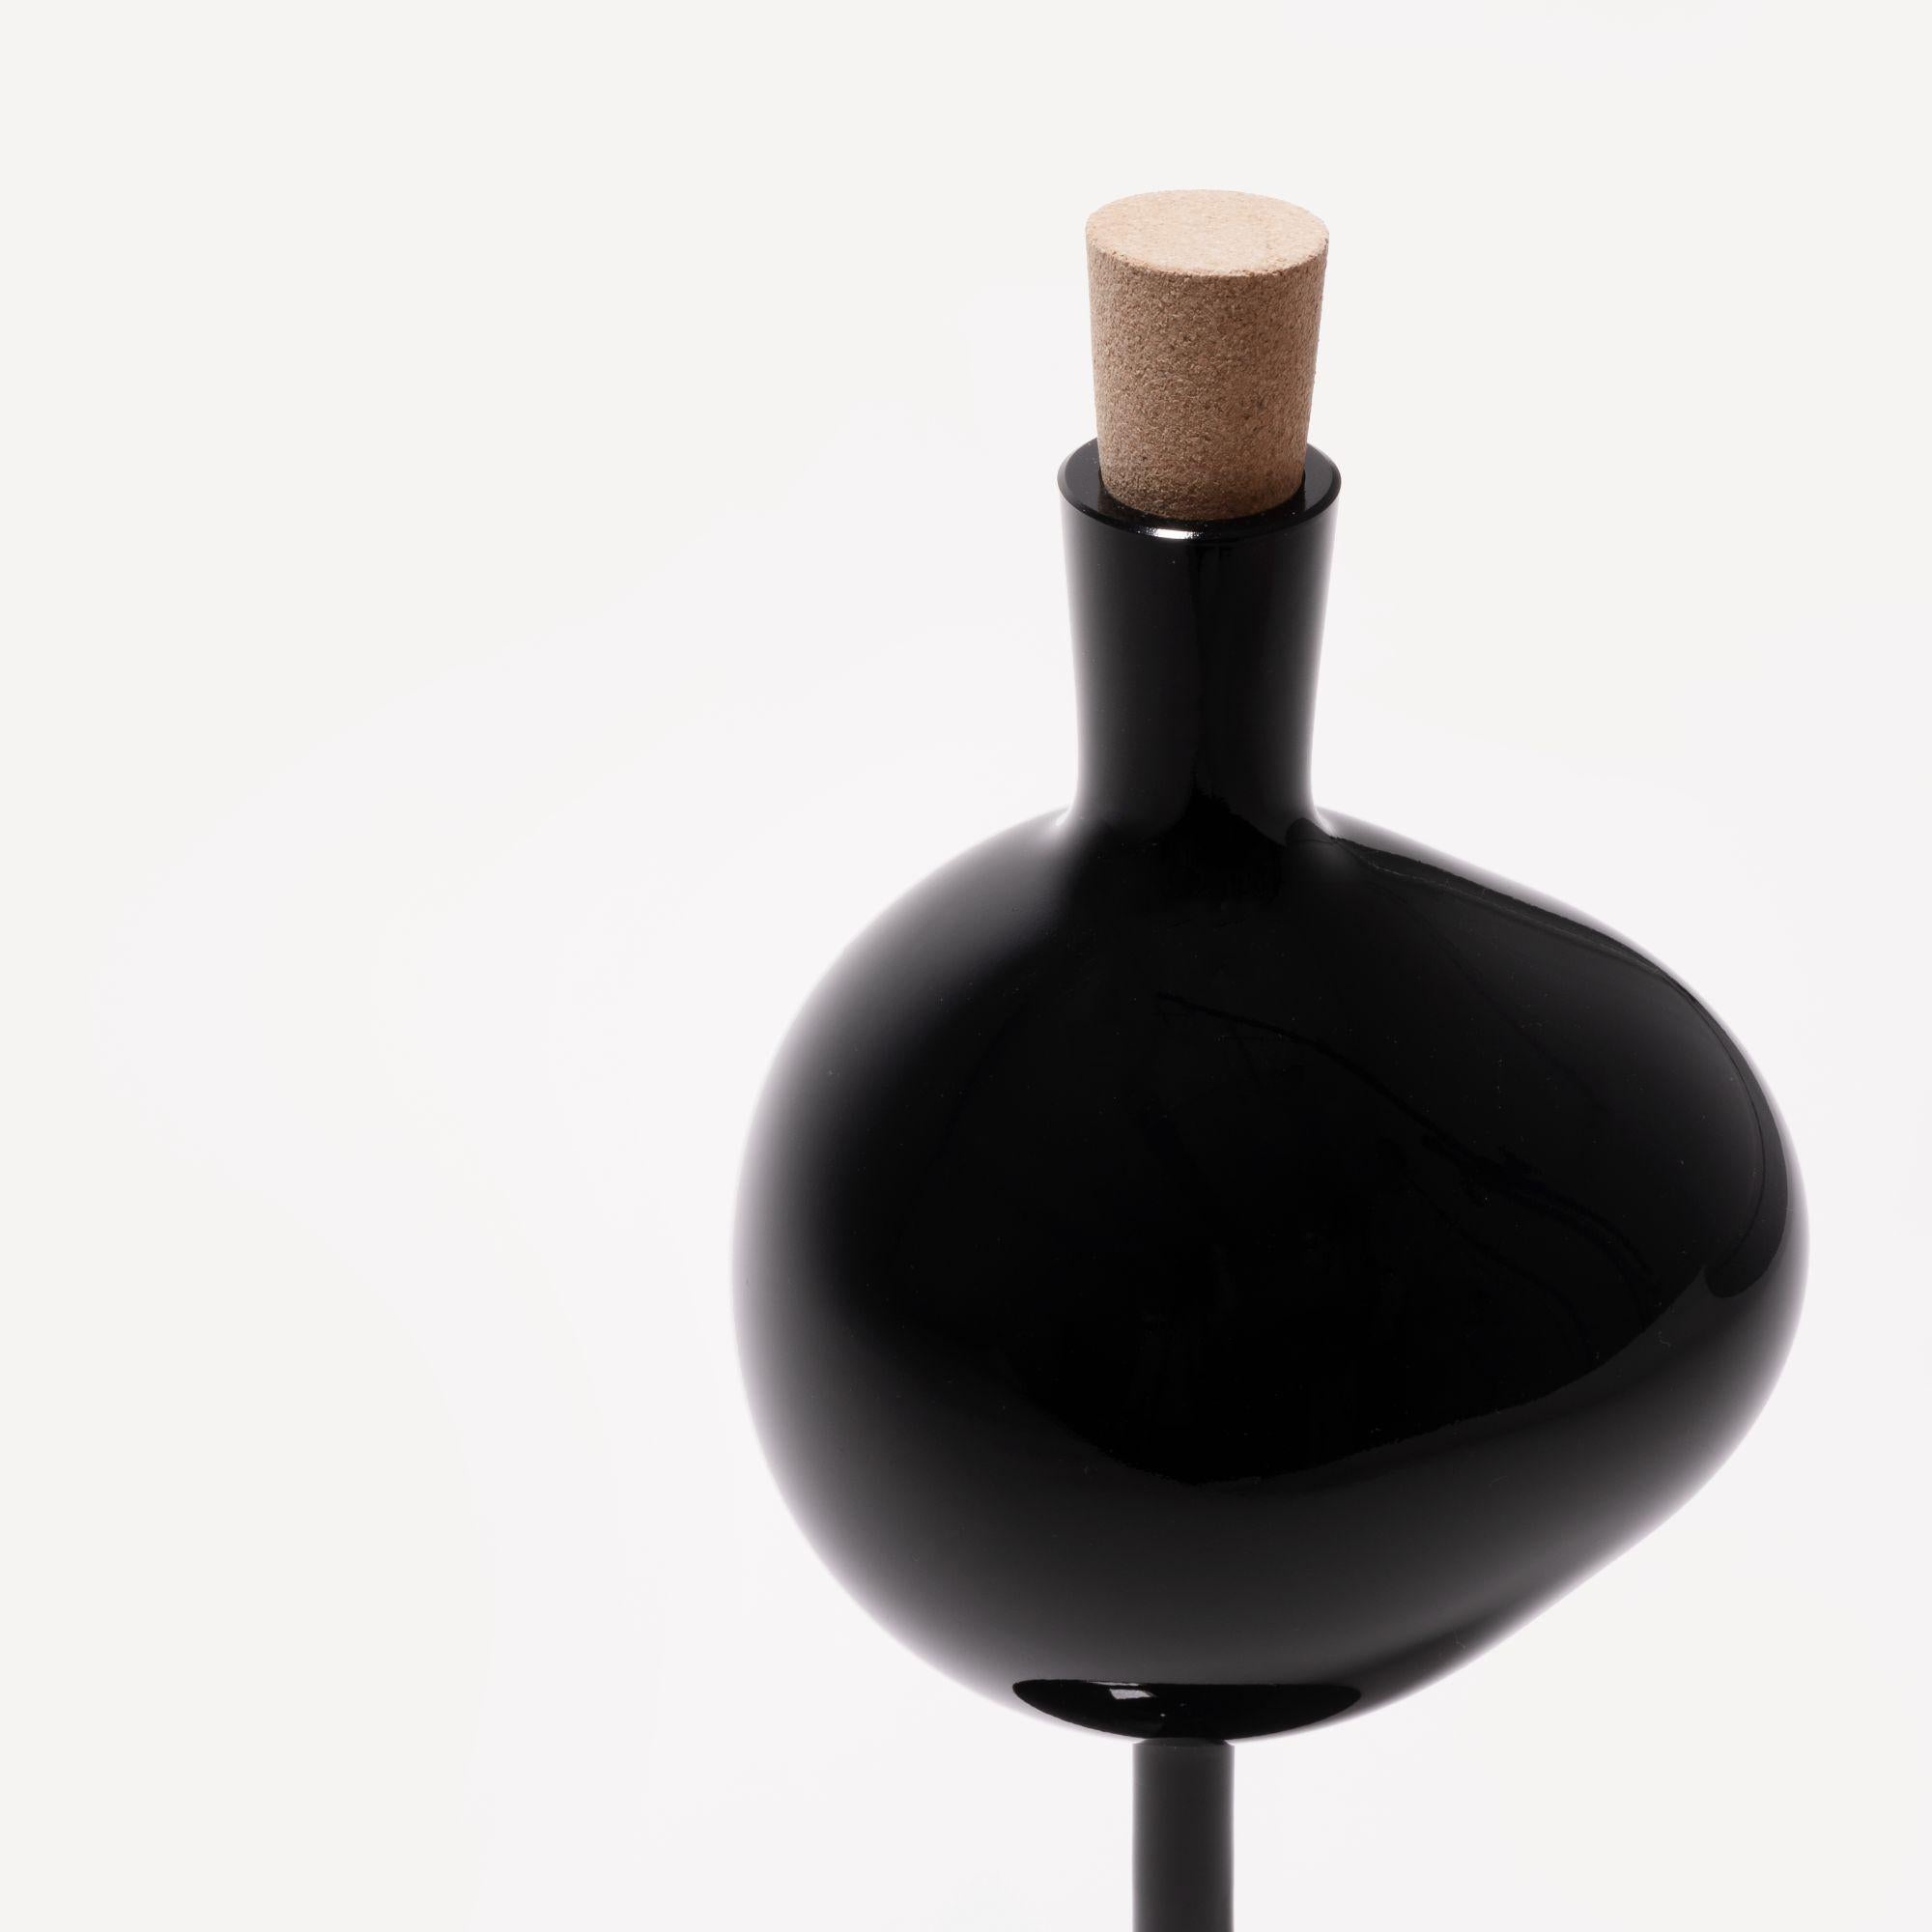 Like a tall wineglass, Bod balances confidently while its bowl captures the play of light. With their sheer and tall shape, the bottles are a piece of art that stands grounded in every home. The black glass bottle on a foot has an opaque surface and